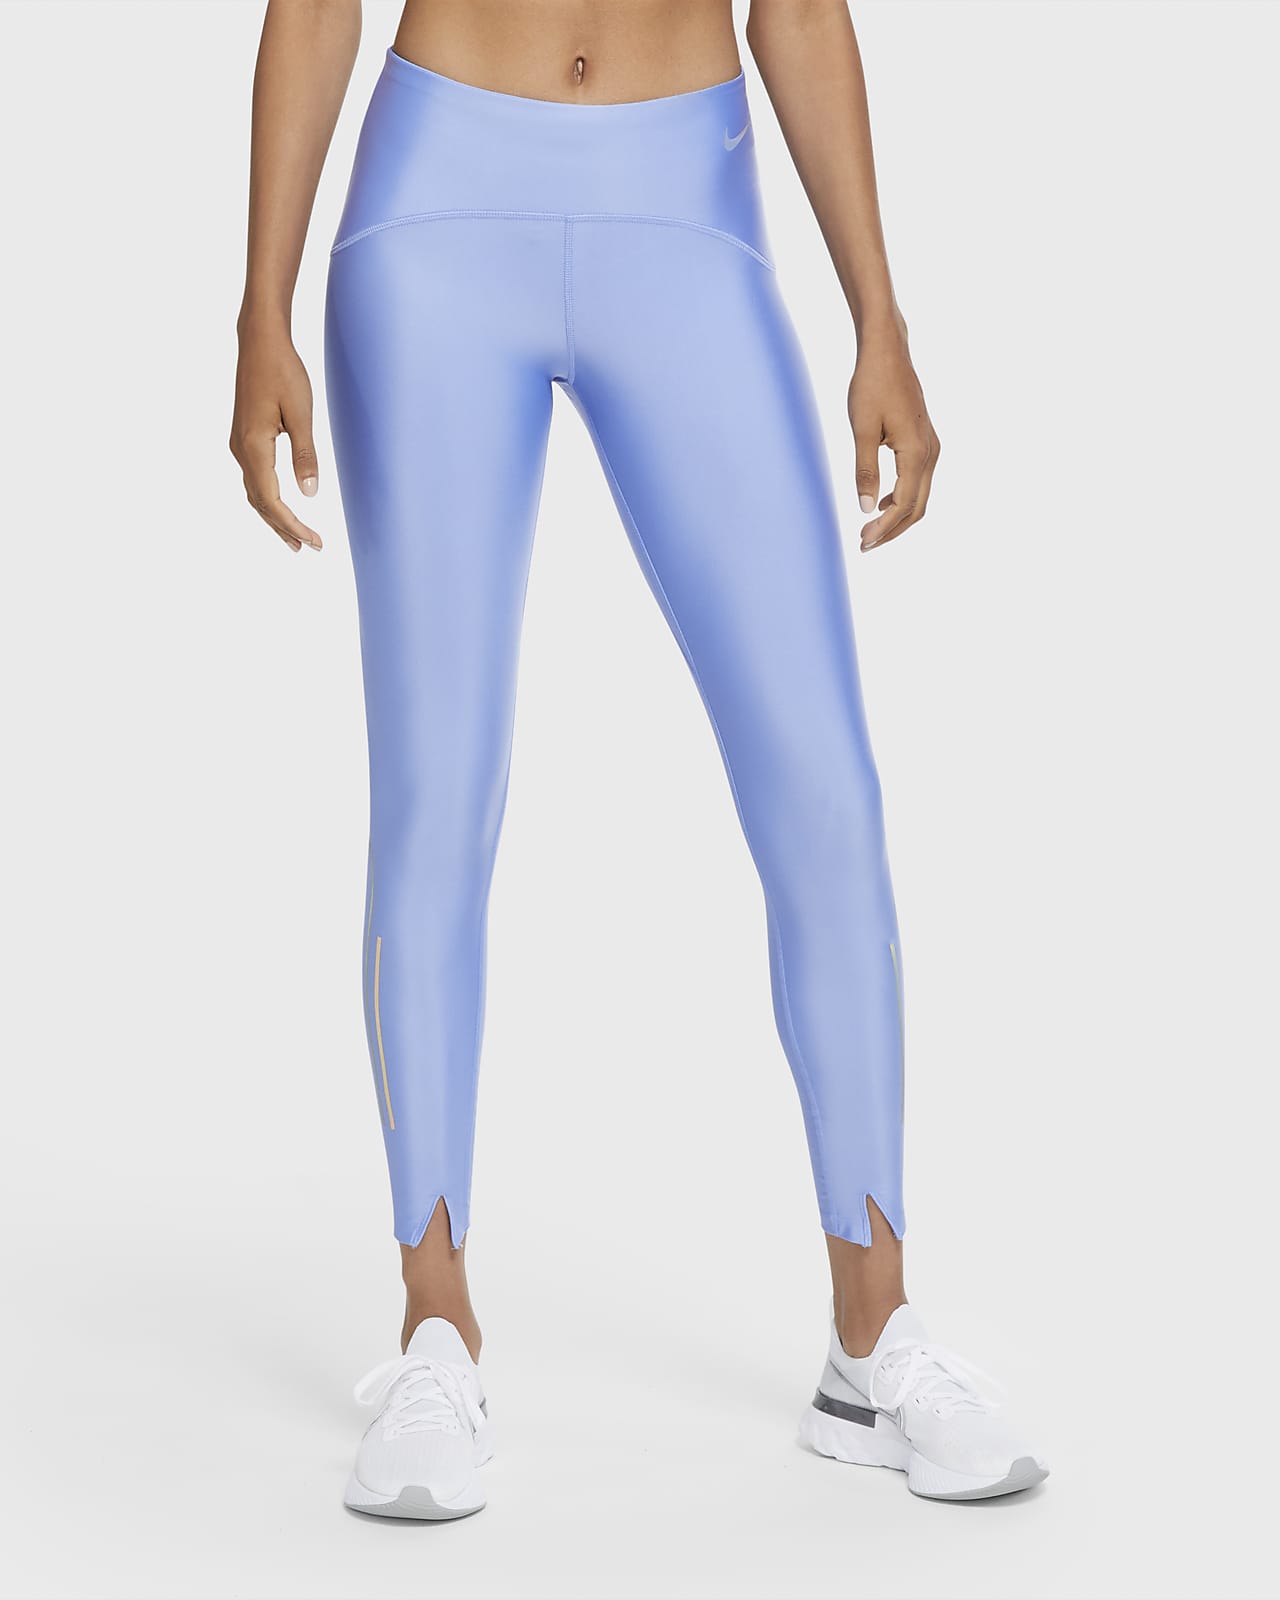 the nike speed tight fit